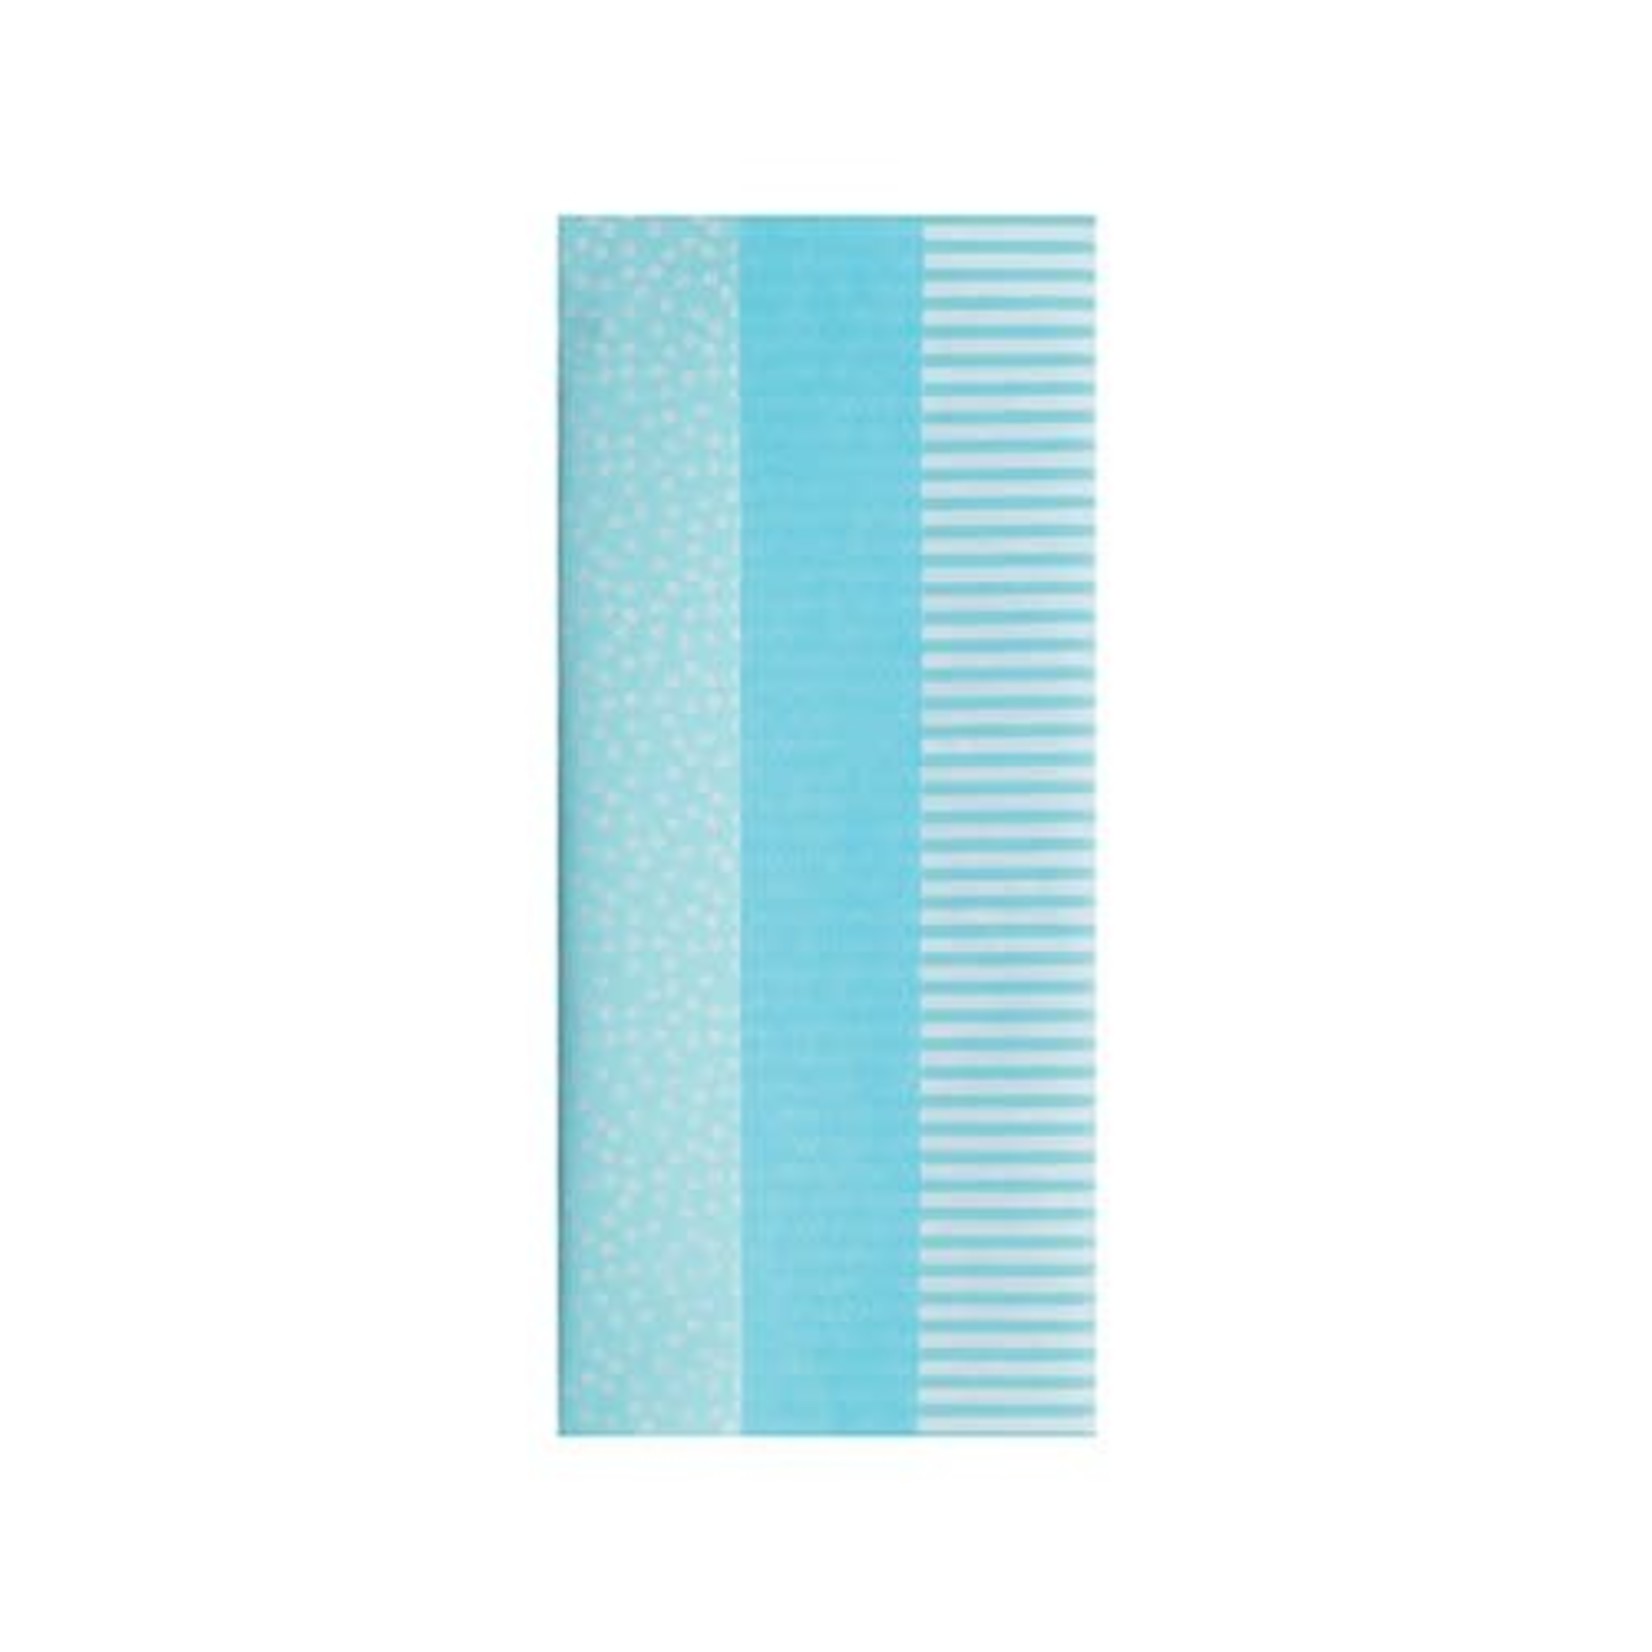 Eurowrap Tissue Paper - Baby Blue - 6 sheets